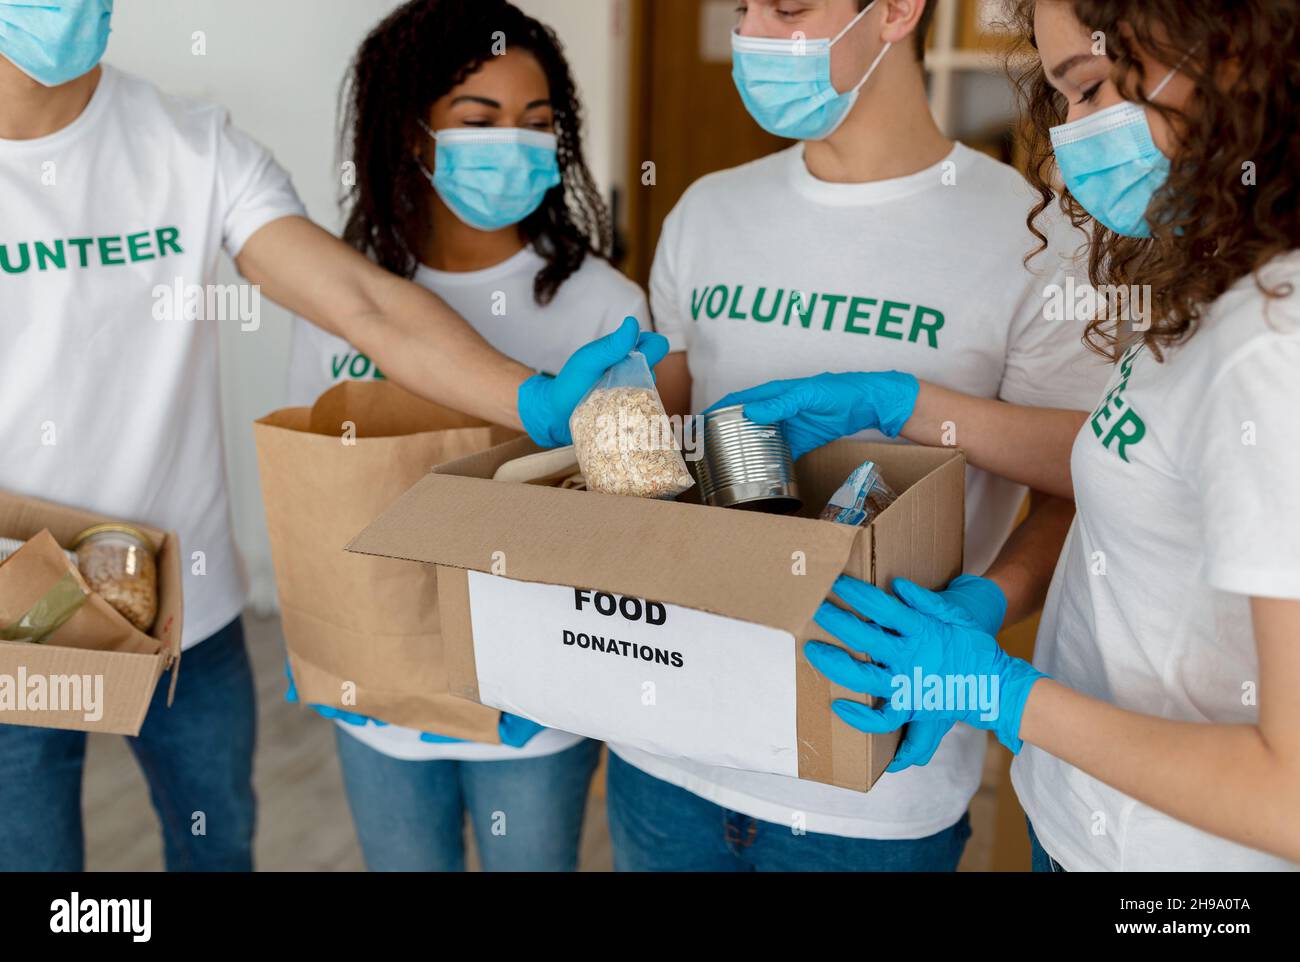 International group of young volunteers sorting donated food in boxes, working in charity donation center, closeup Stock Photo